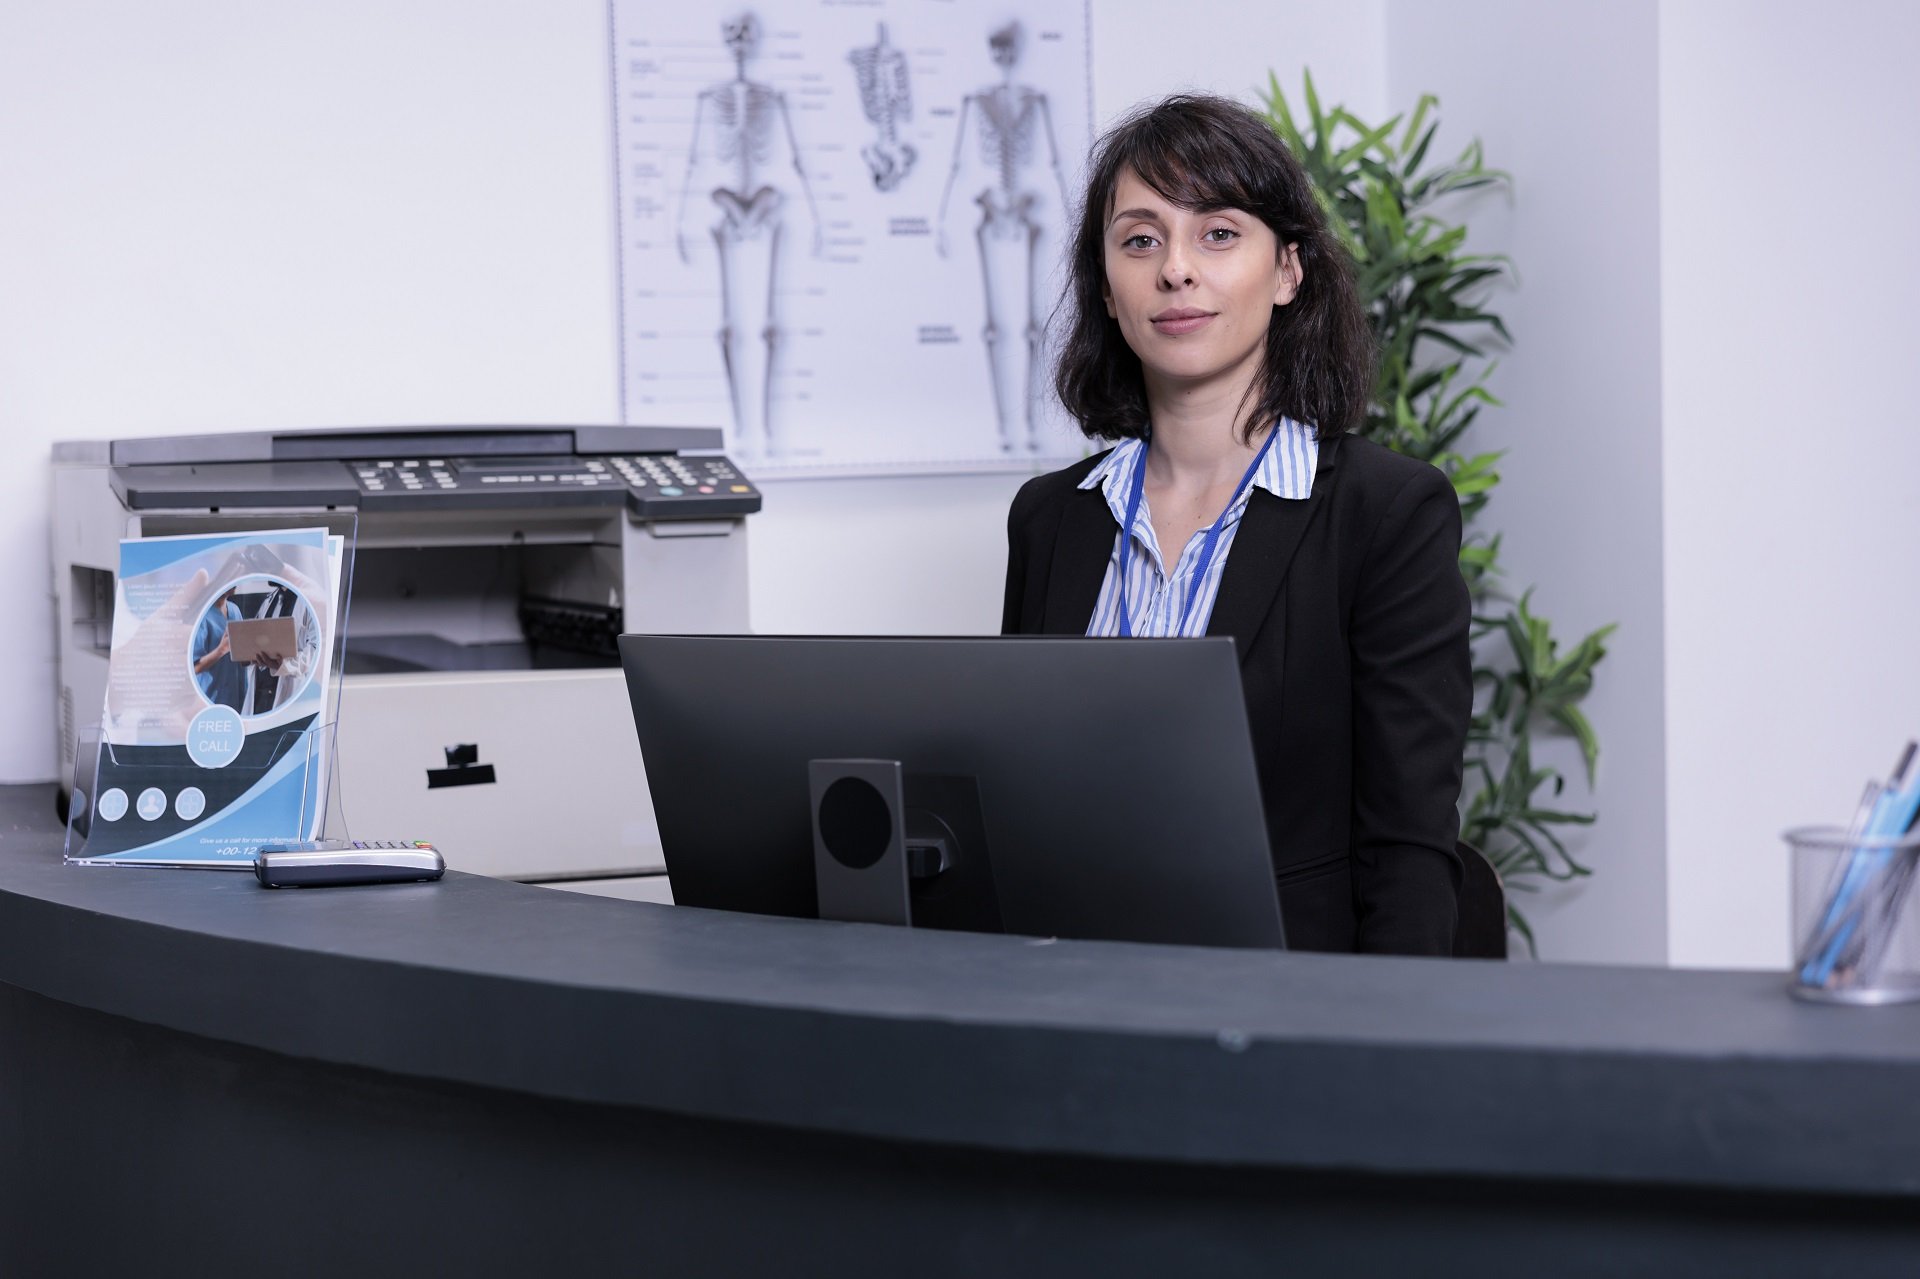 The Physical Therapy Practice Manager’s Guide to Virtual Medical Receptionists